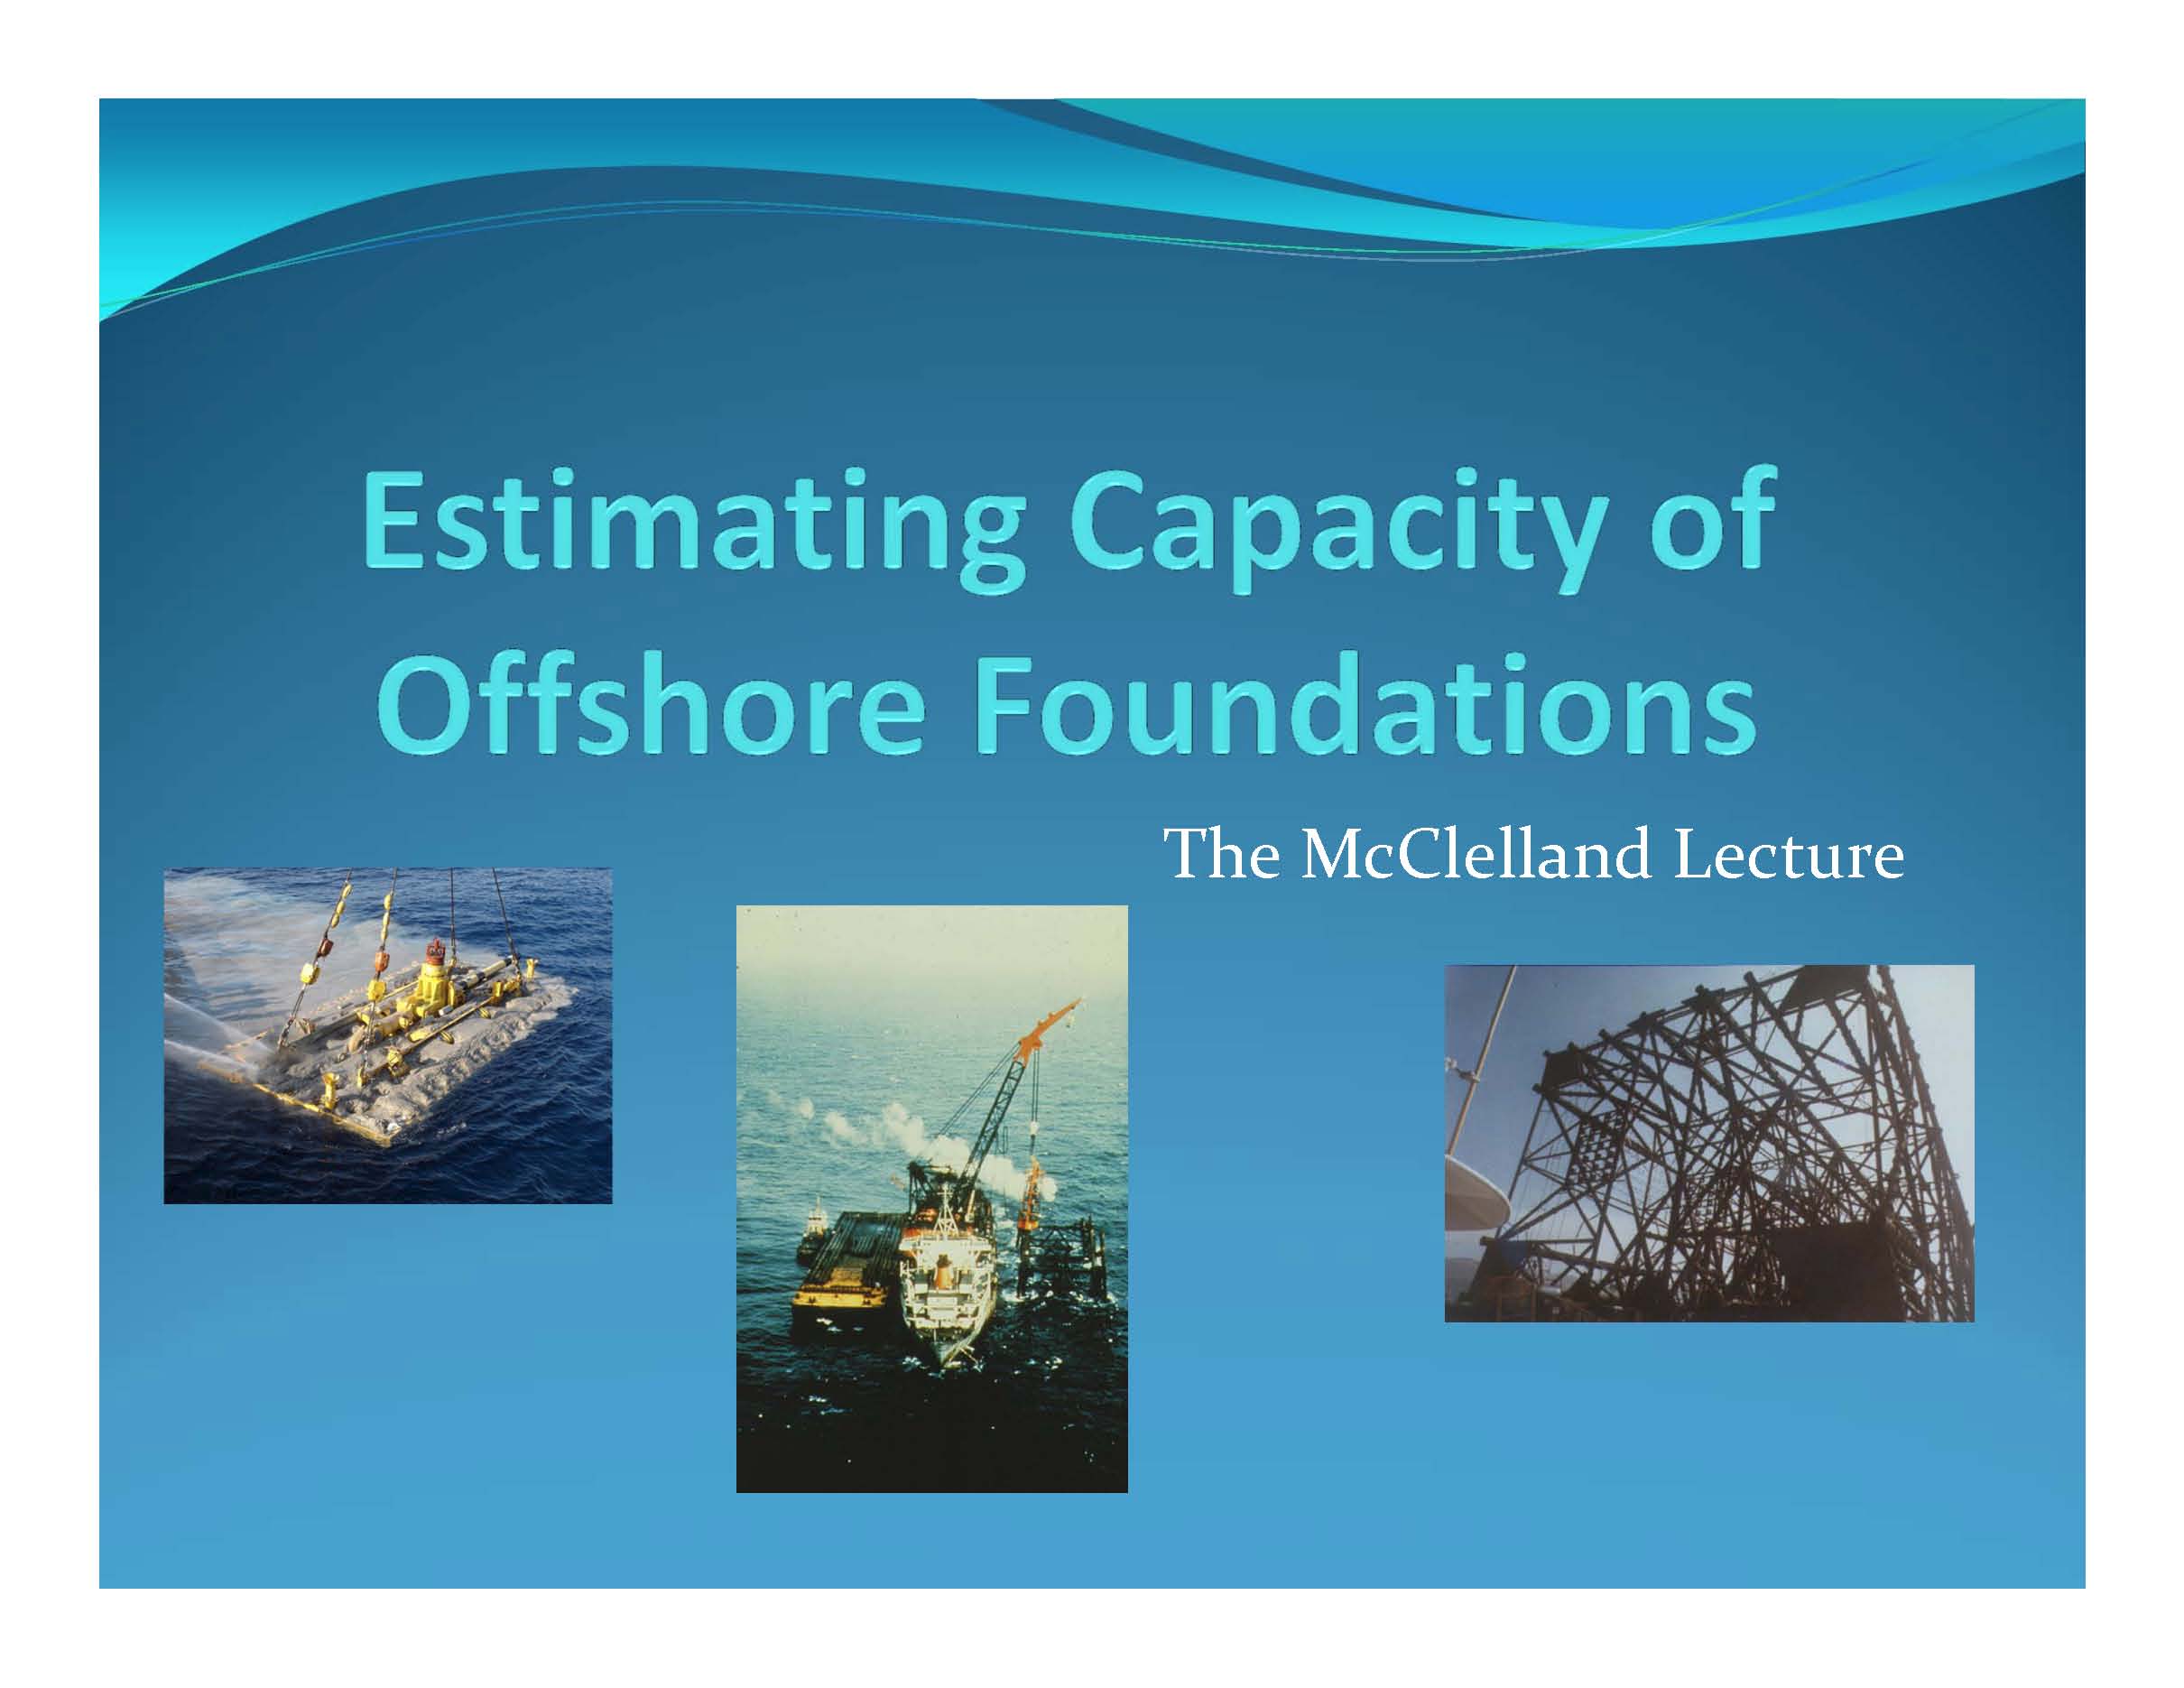 Estimating Capacity of Offshore Foundations (First ISSMGE McClelland Lecture) {"category":"honour_lecture","subjects":["Deep Foundations", "Offshore Geotechnics"],"number":"HML101","instructors":["James D. Murff"]}